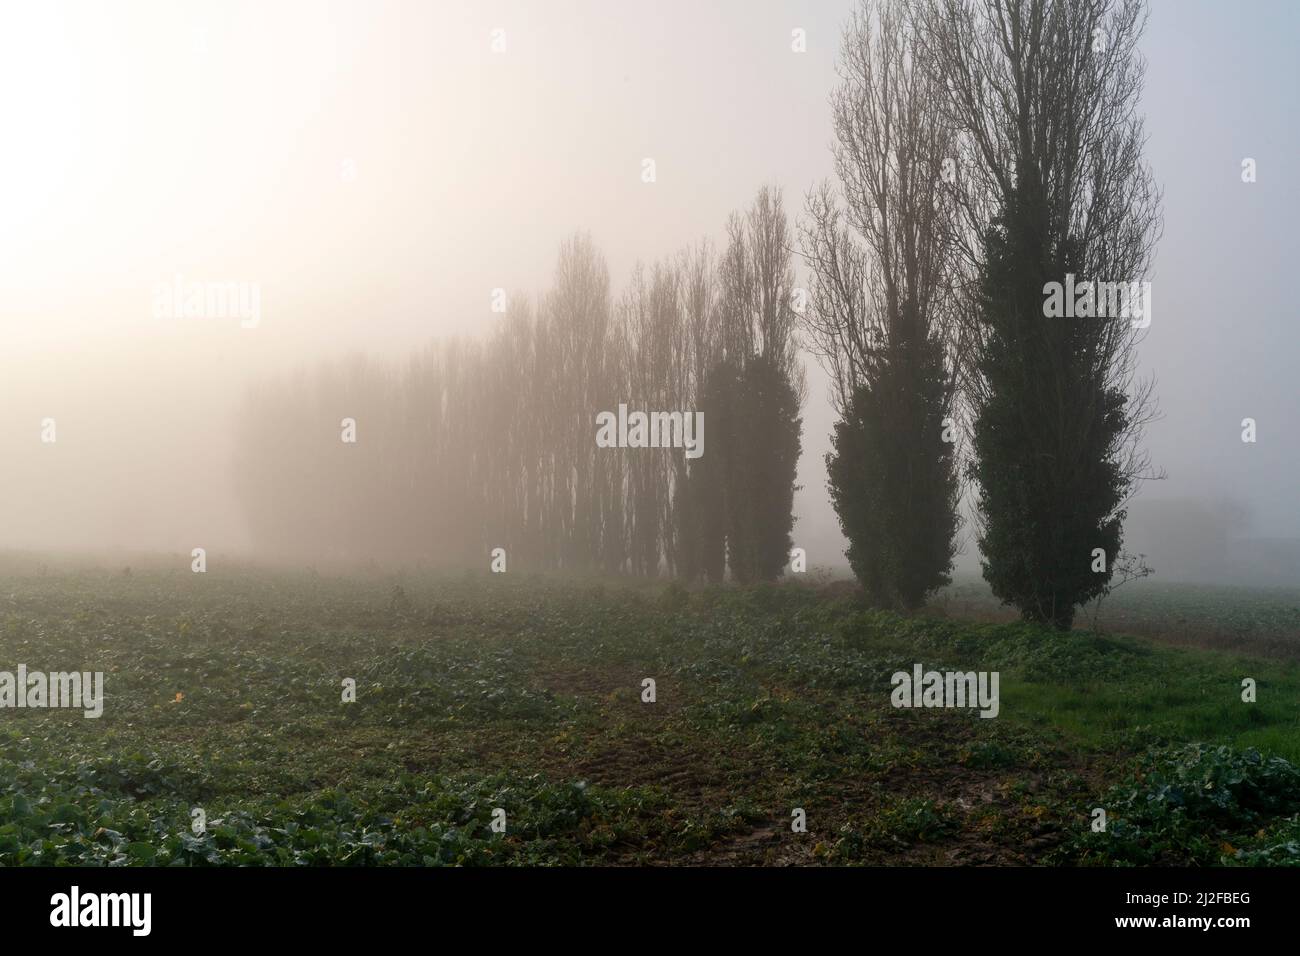 Atmospheric shot of a row of poplar trees receding into the mist on some farmland with crops in the foreground. Stock Photo